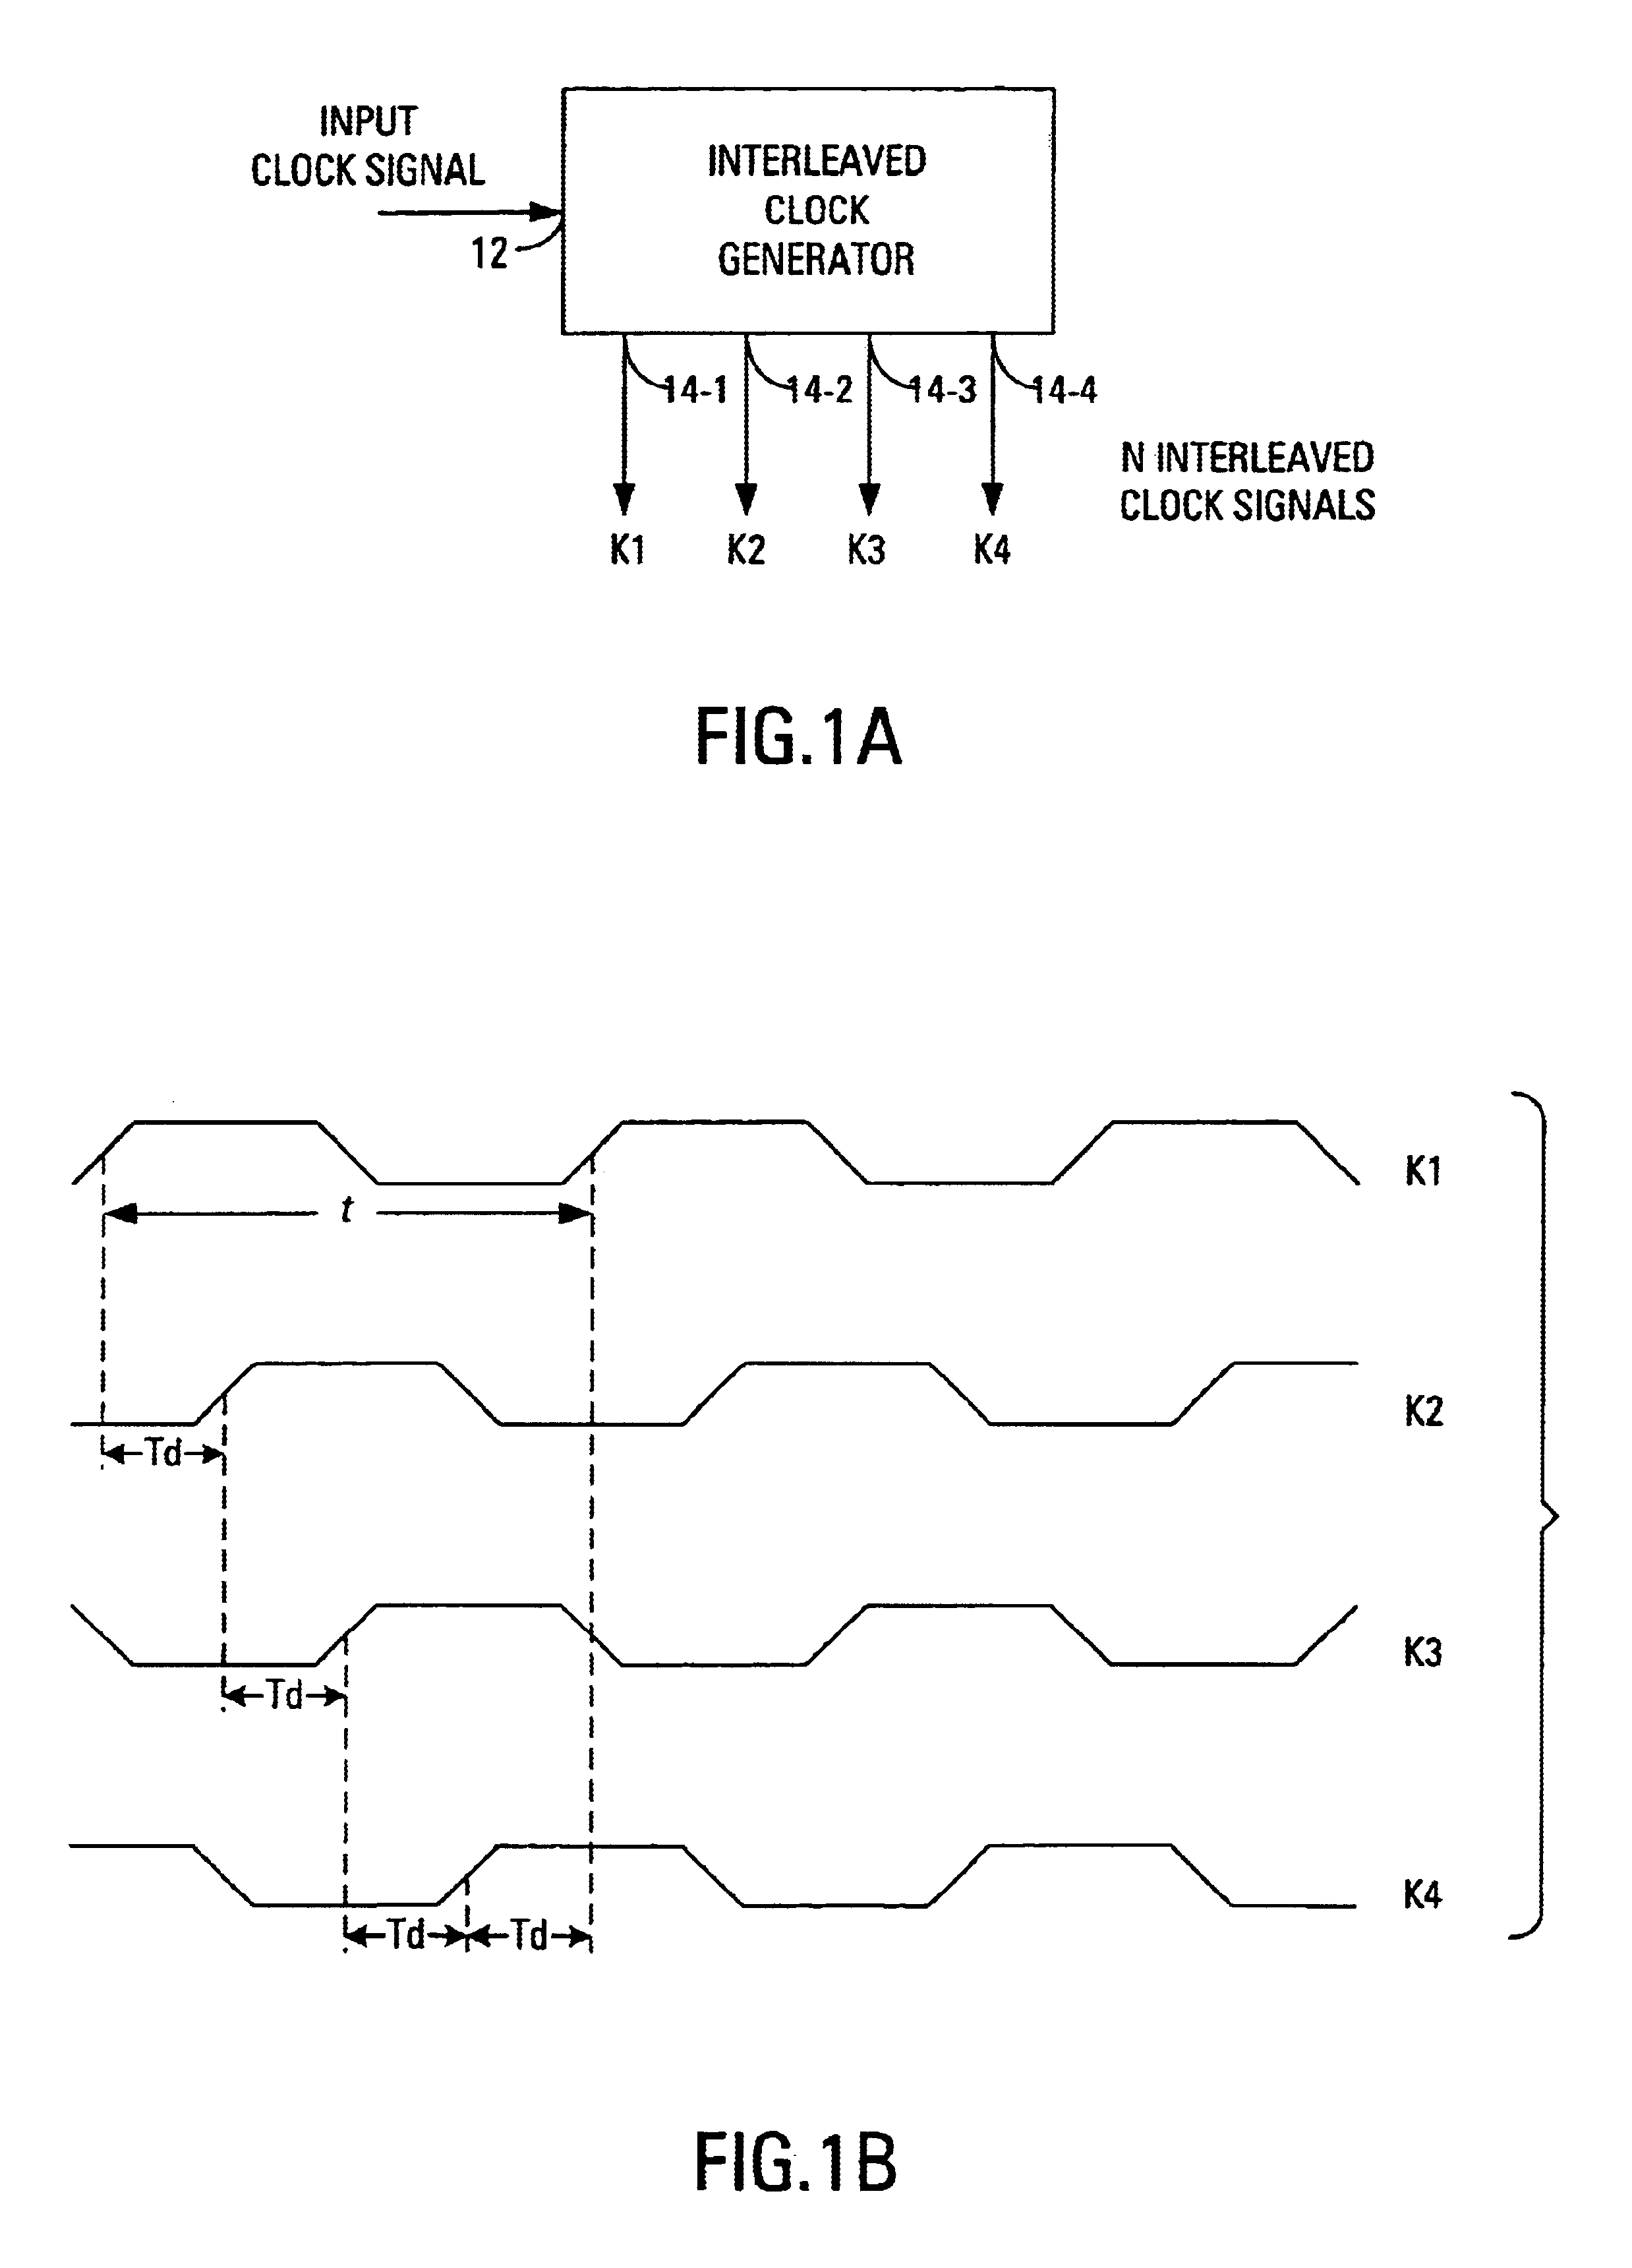 Interleaved clock signal generator having serial delay and ring counter architecture